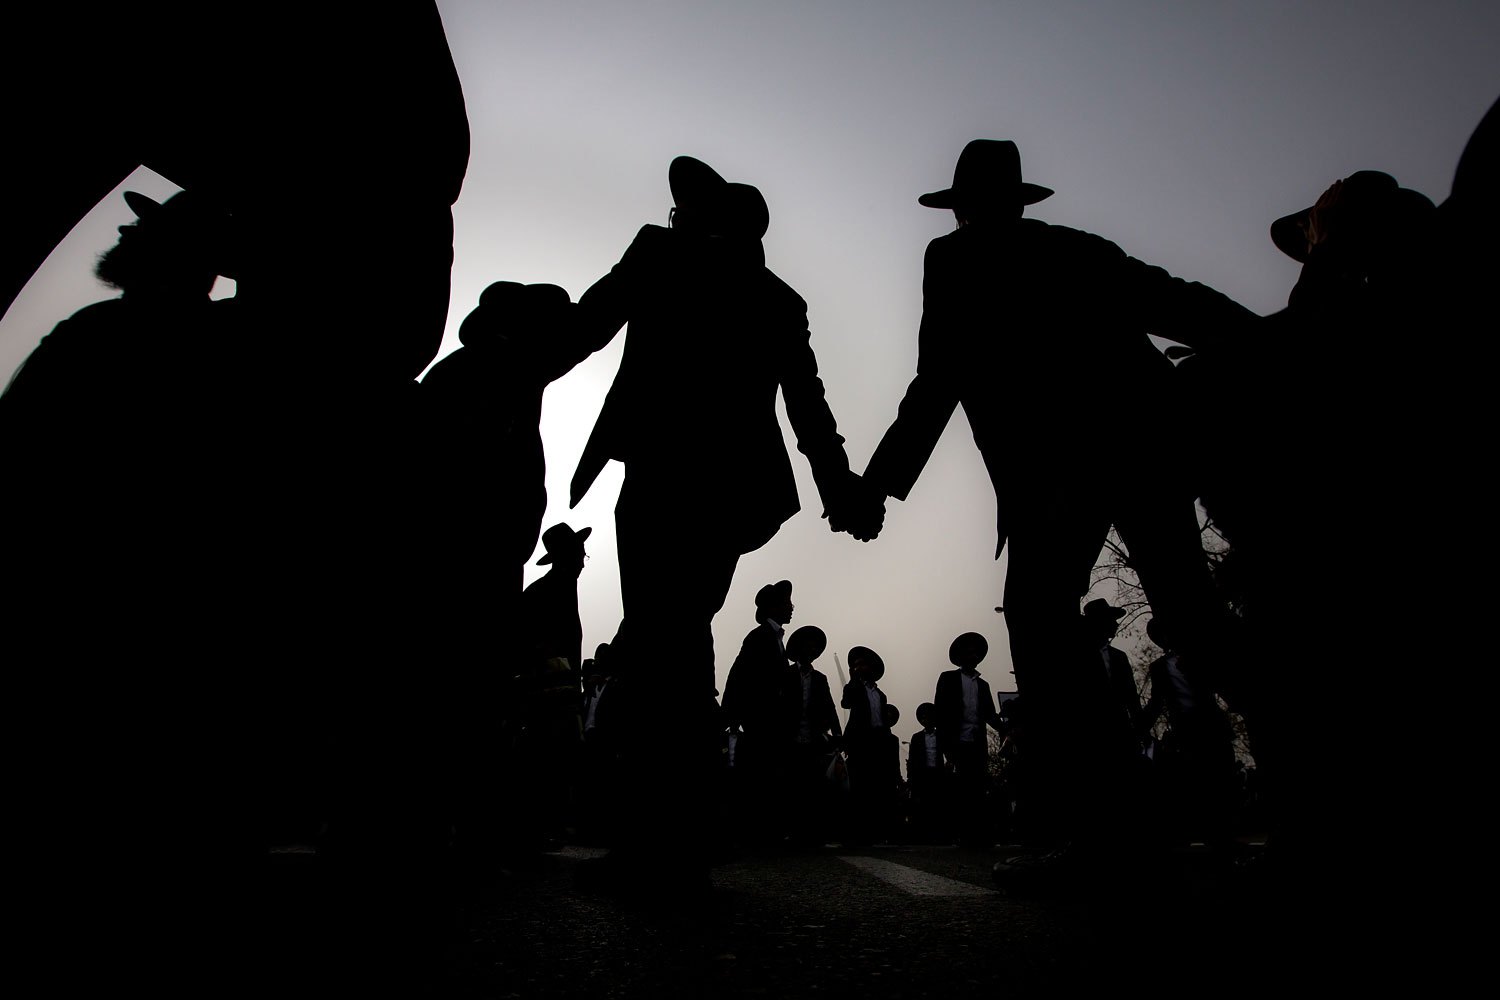 Ultra-Orthodox Jewish men dance at a rally in a massive show of force against plans to force them to serve in the Israeli military, blocking roads and paralyzing the city of Jerusalem, March 2, 2014.